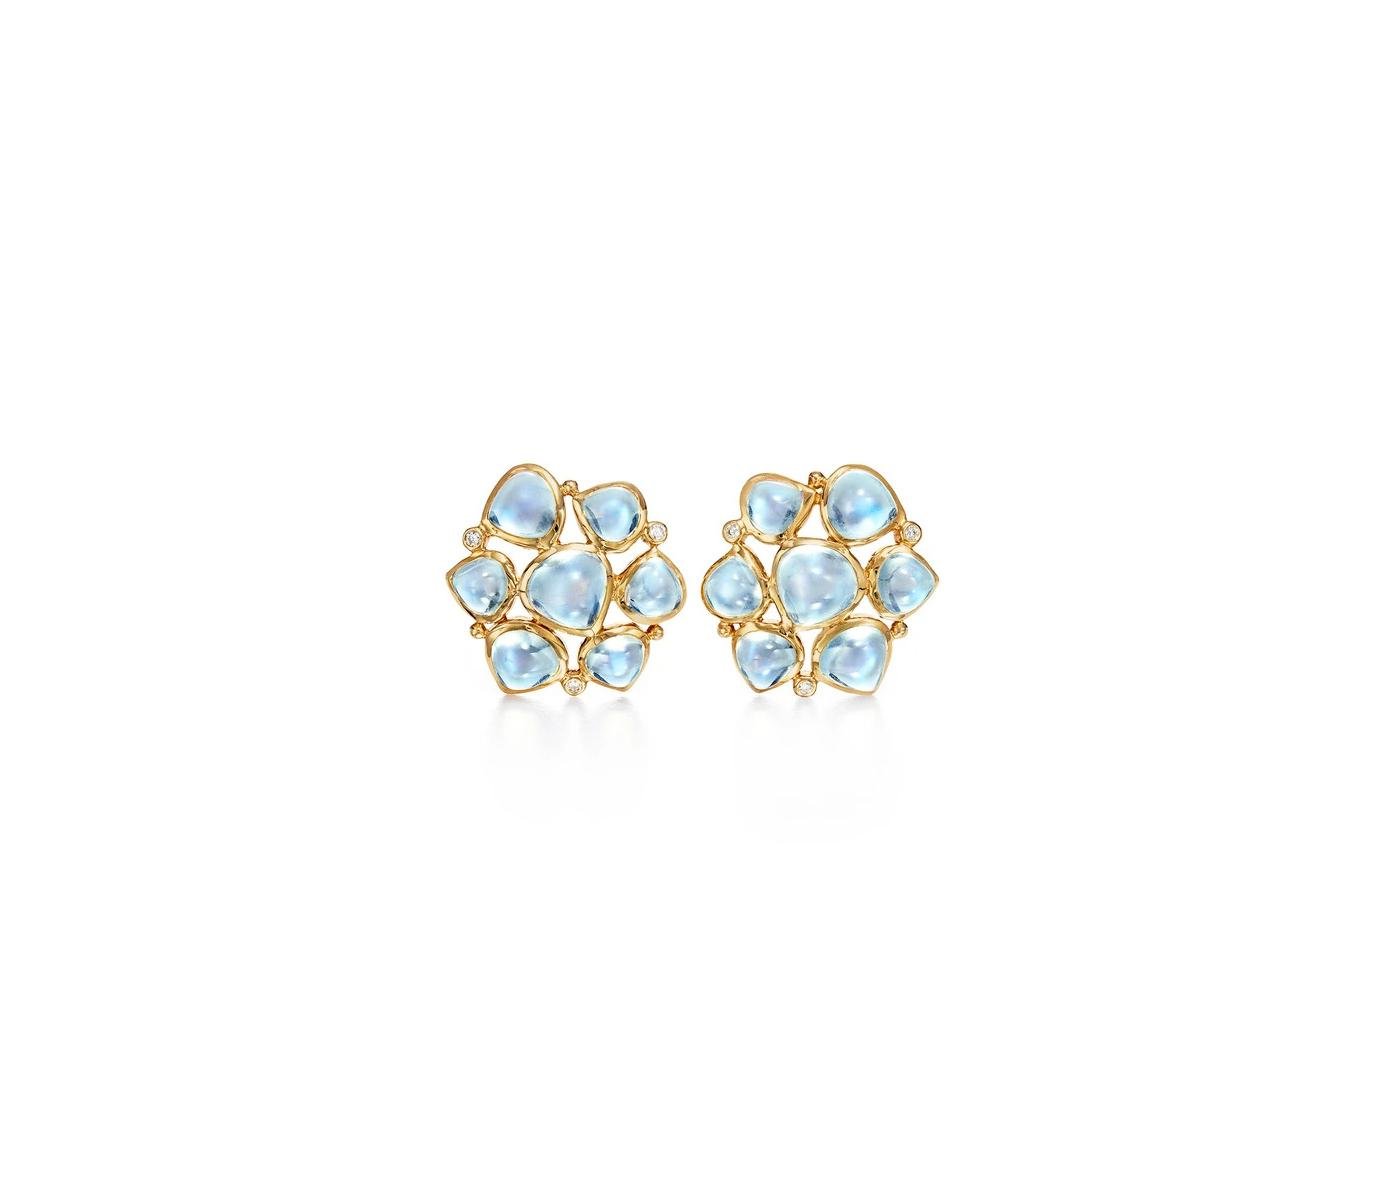 Earrings by Temple St Clair